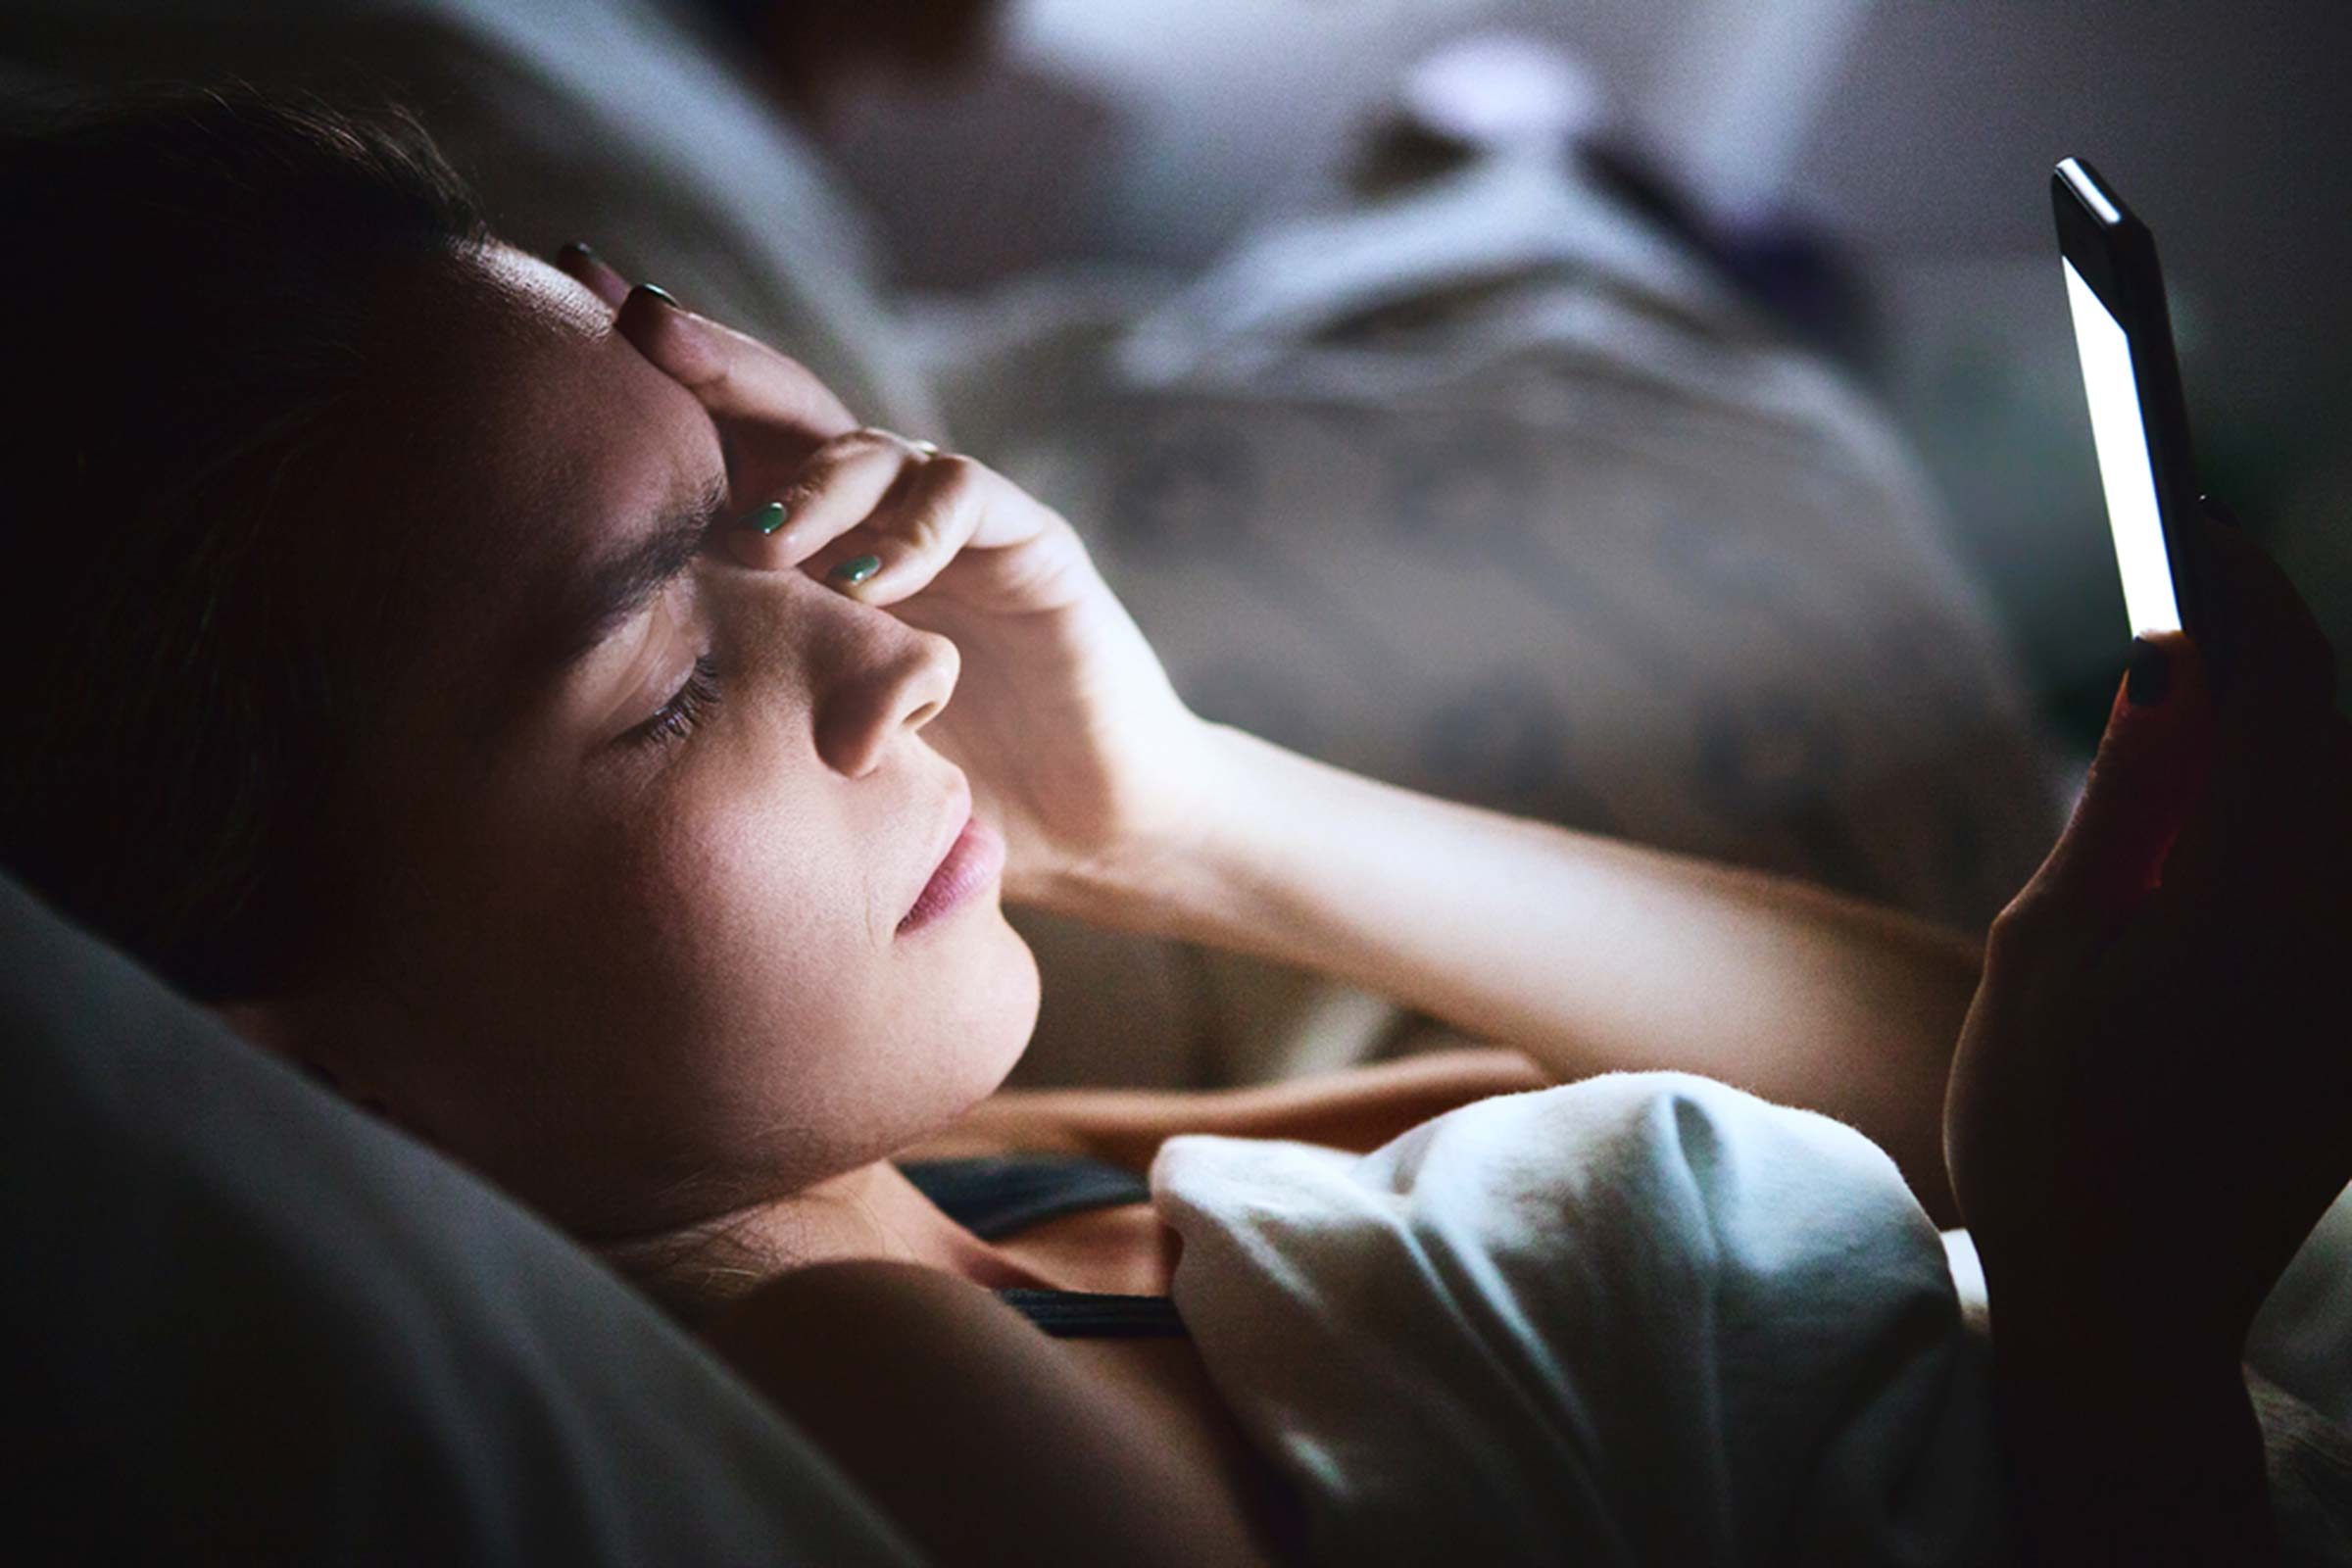 13 Sleep Tips for When You Have Insomnia